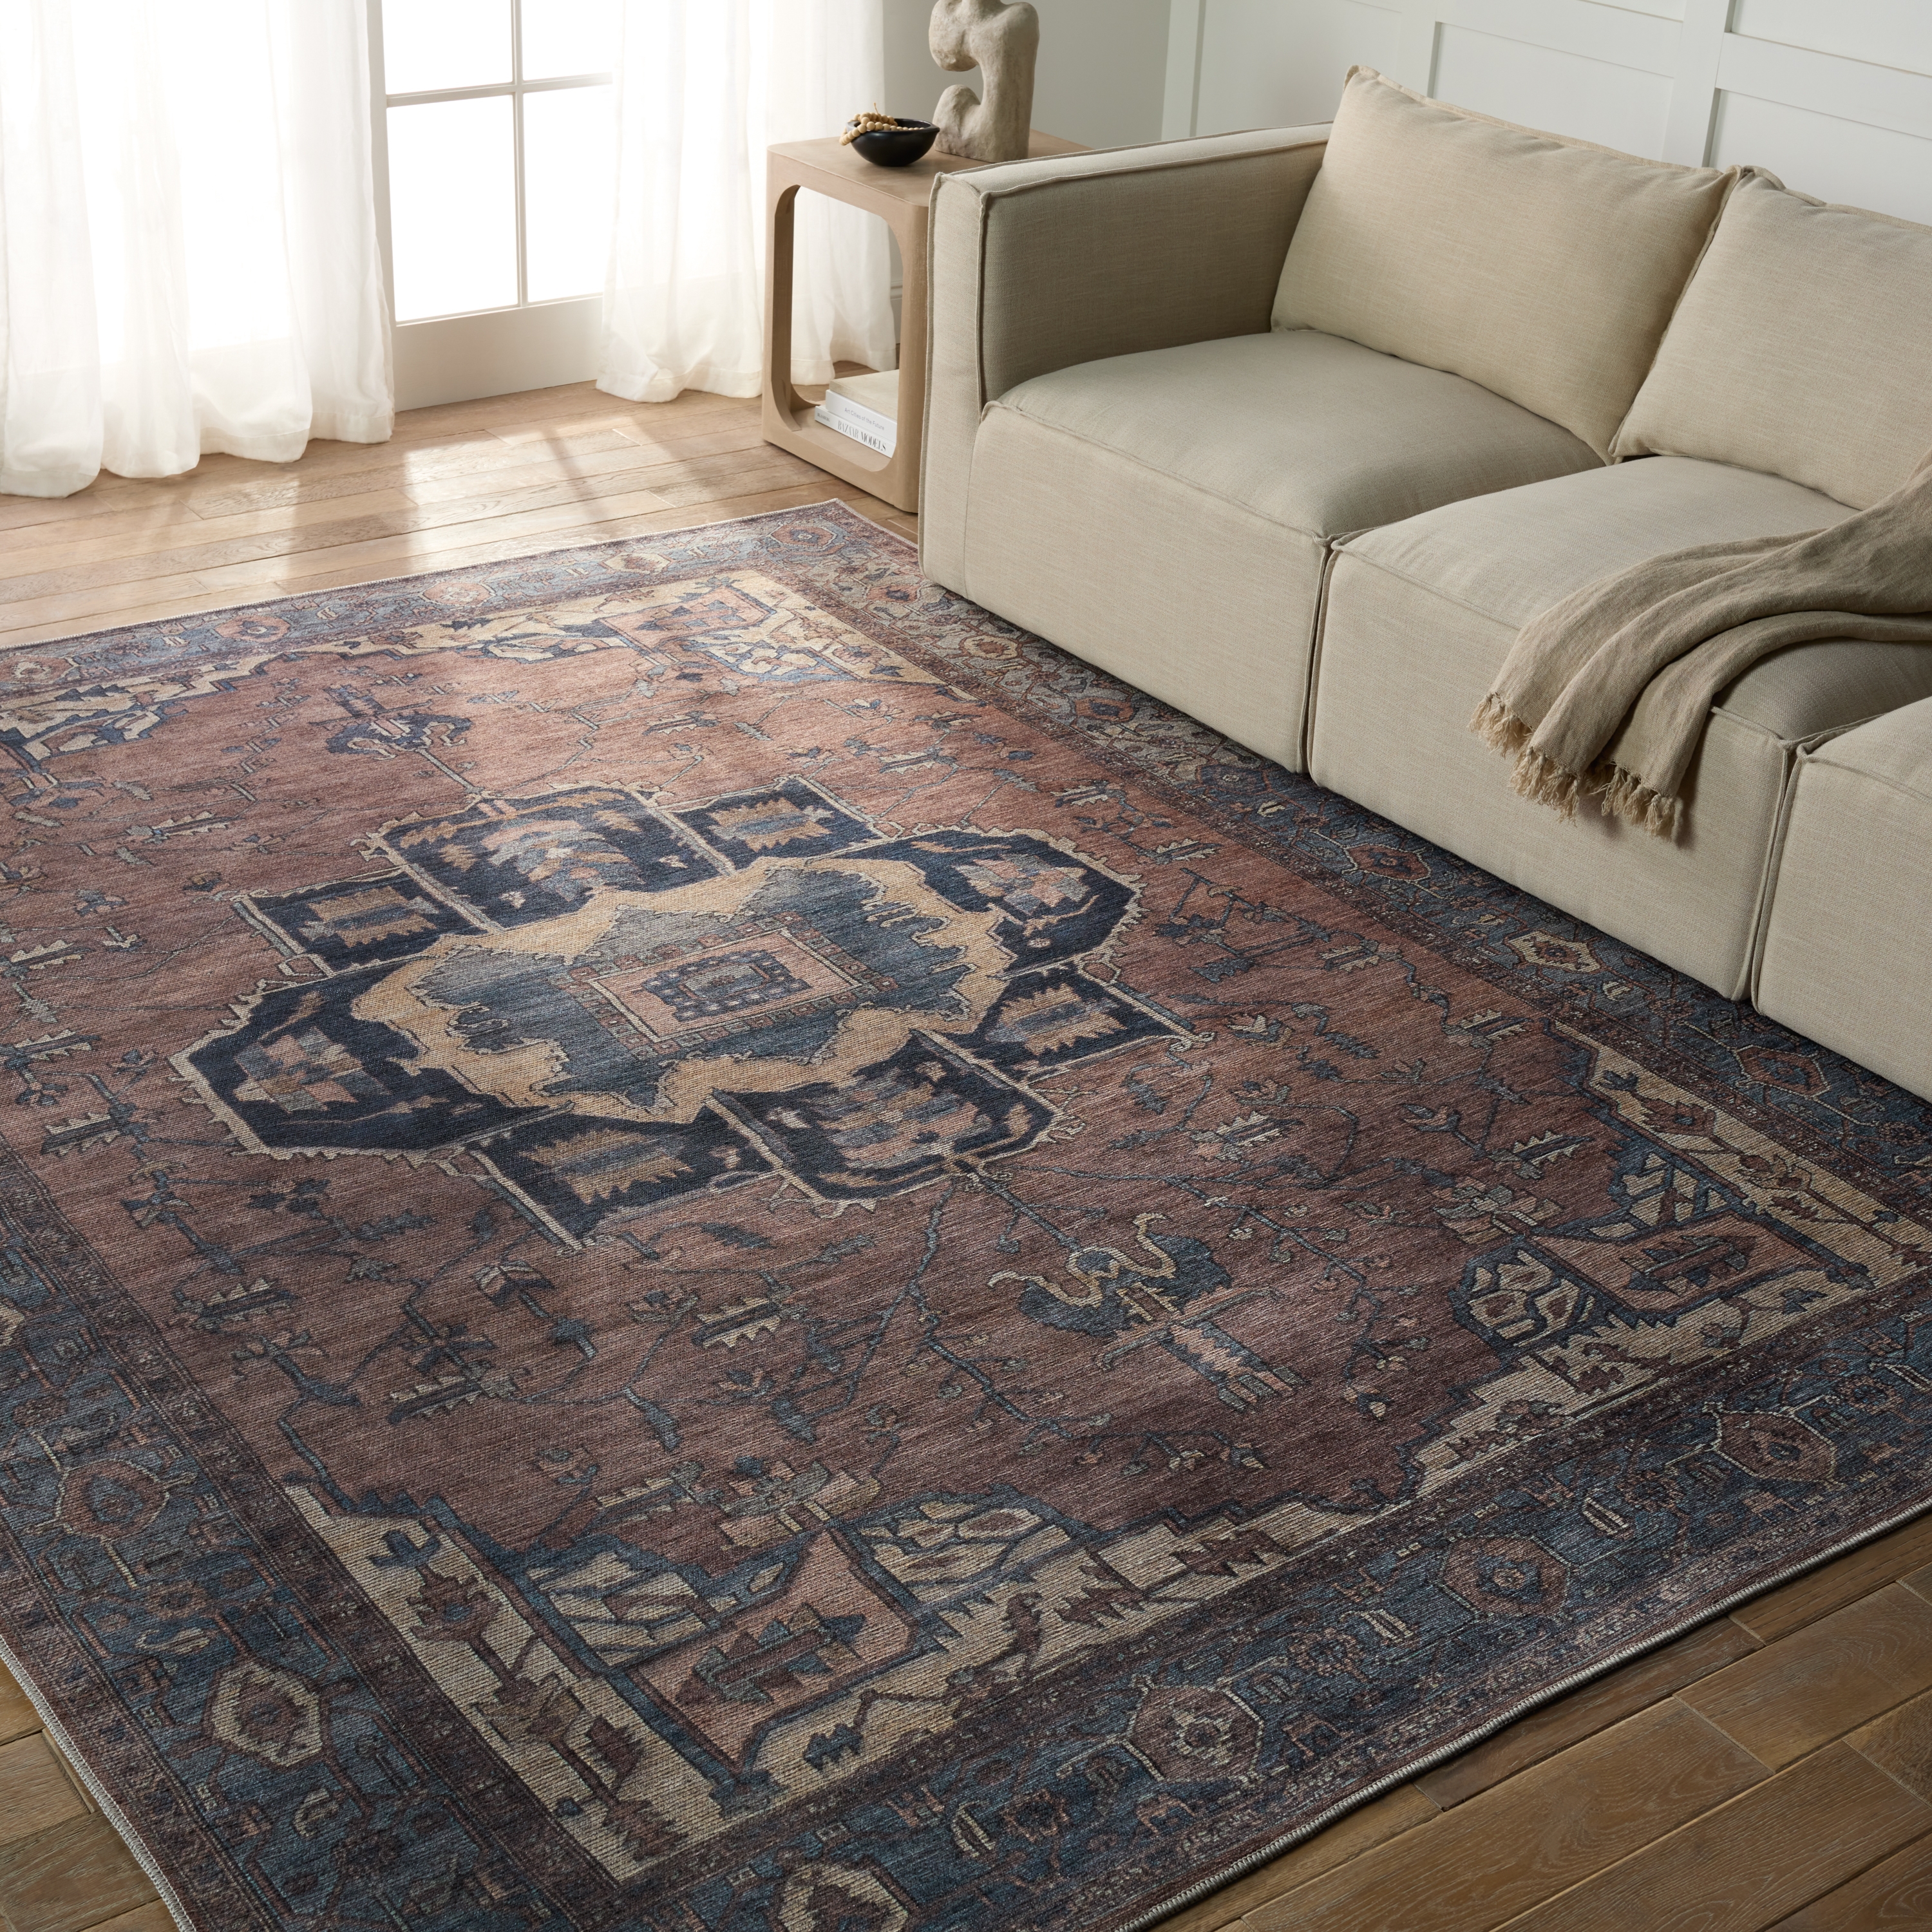 Vibe by Barrymore Medallion Blue/ Dark Brown Area Rug (5'3"X8') - Image 4